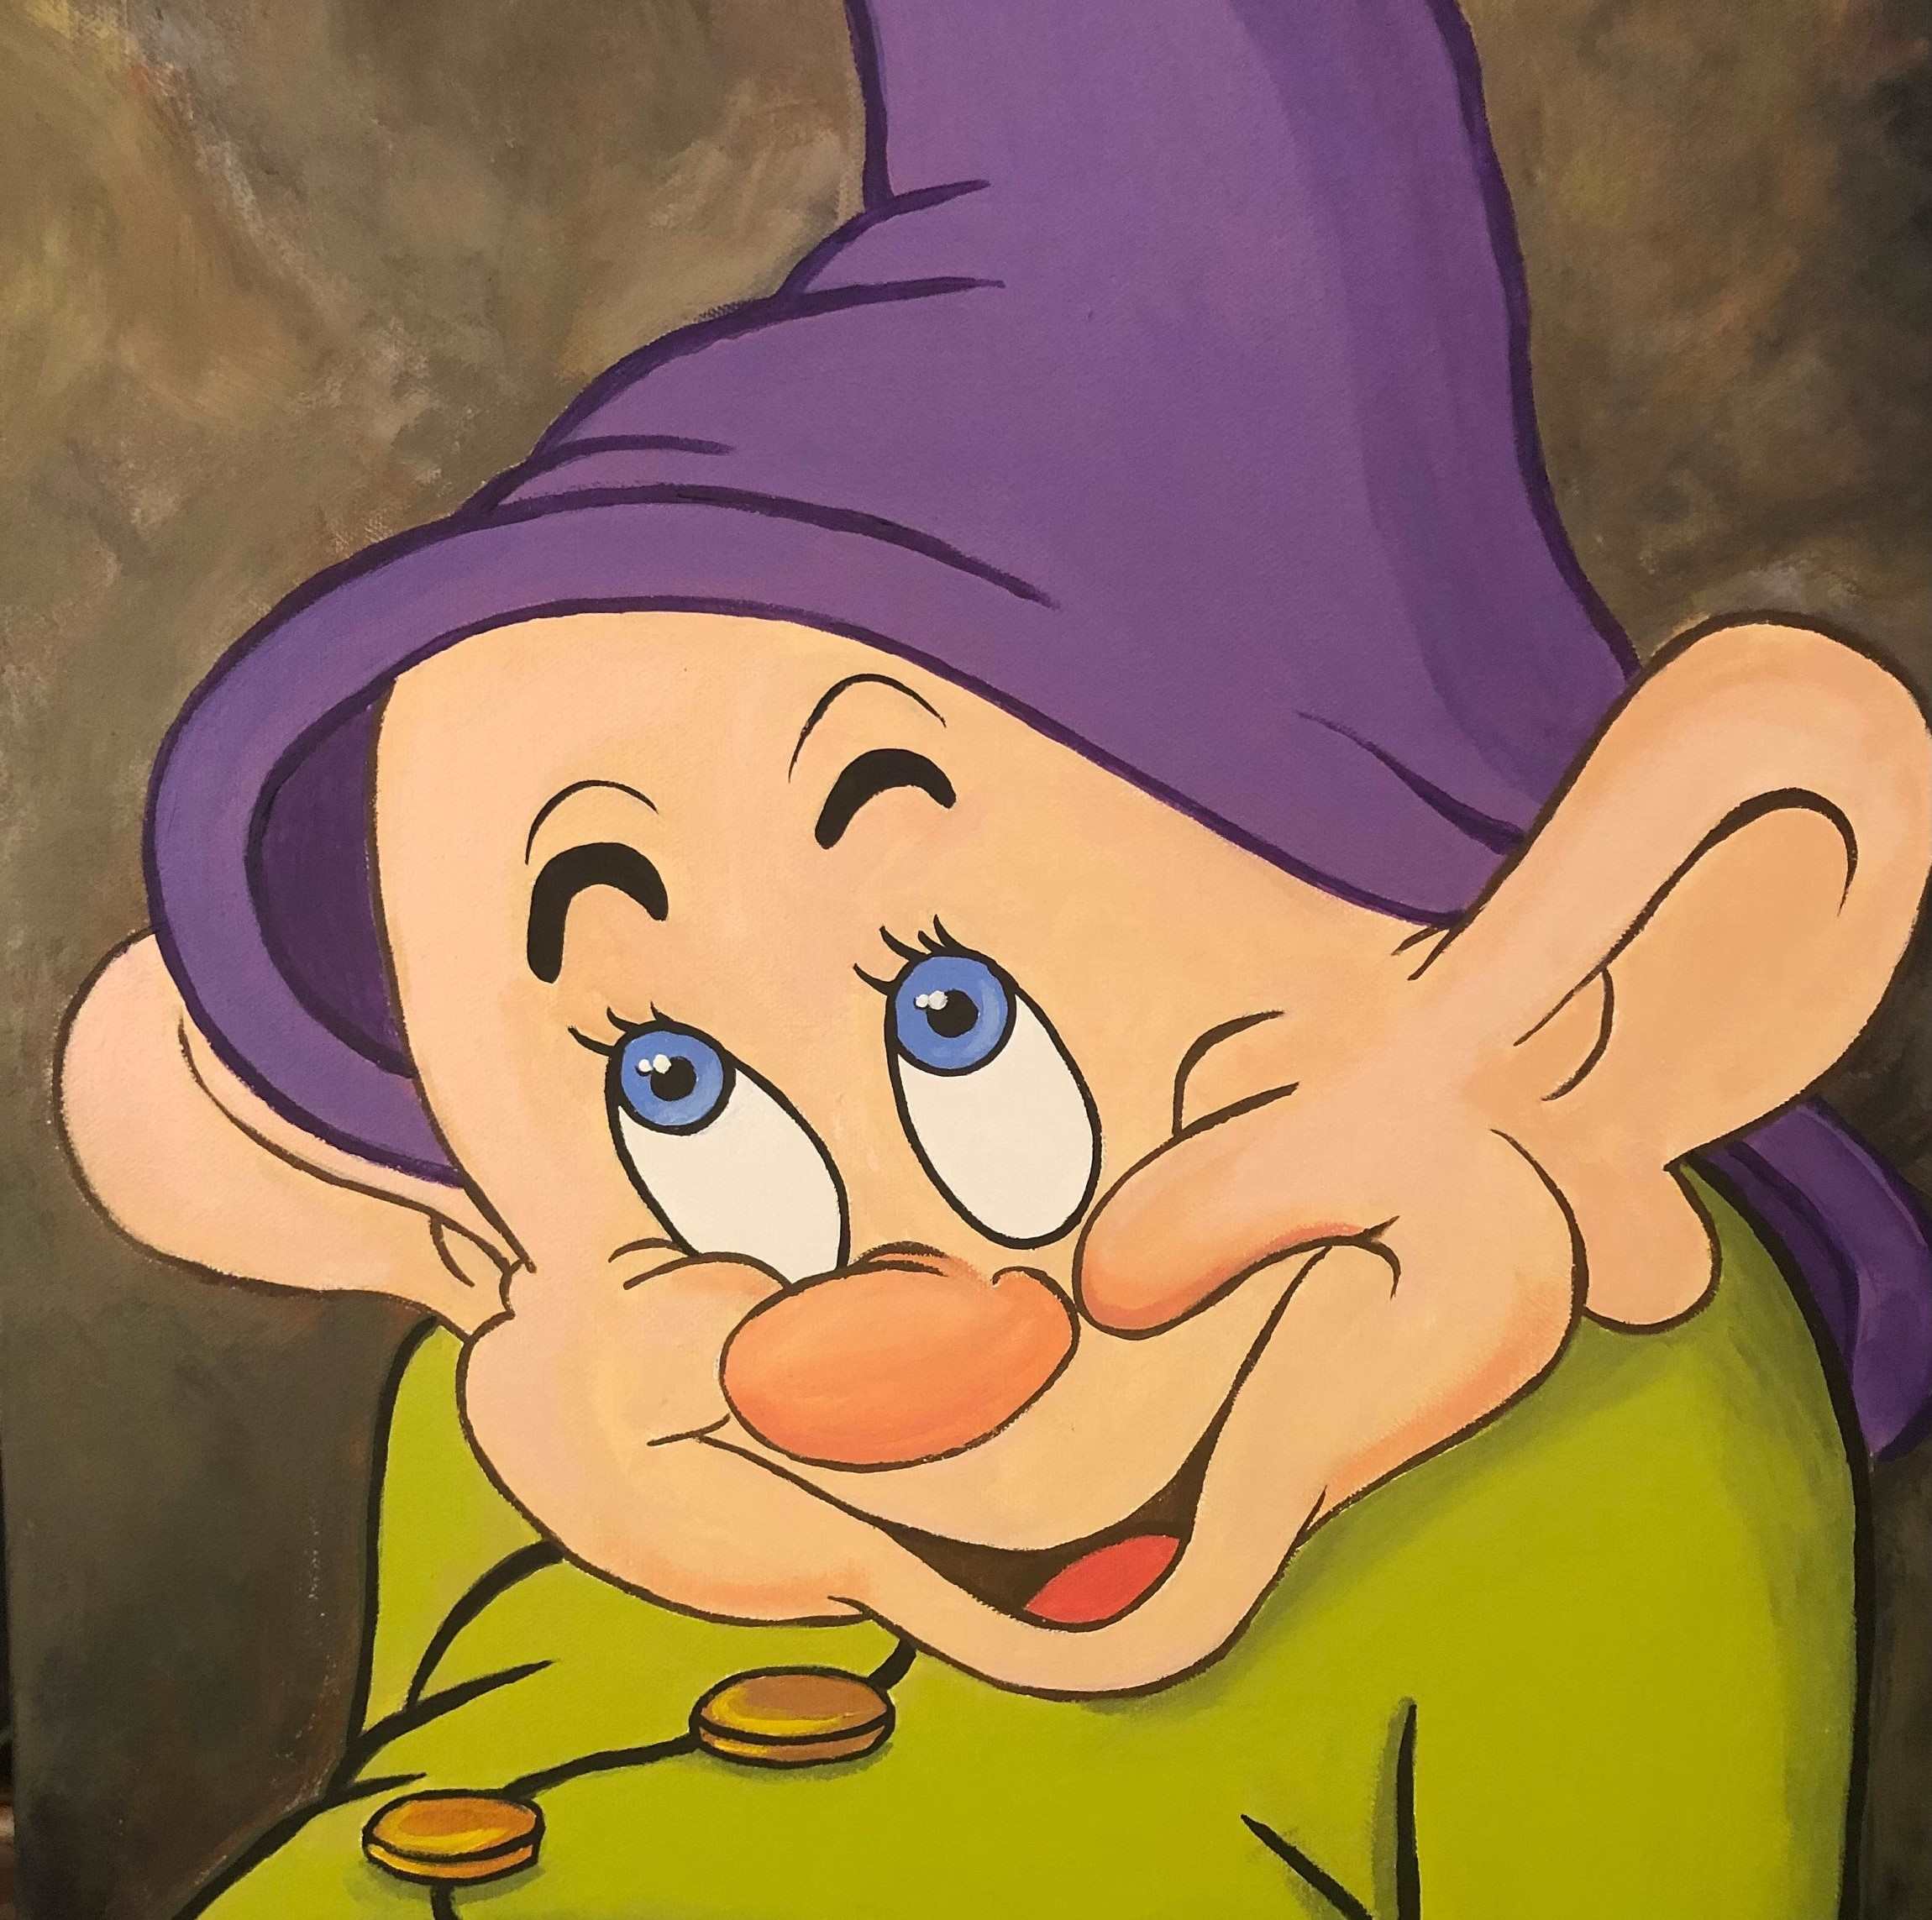 Pictures of dopey from the seven dwarfs